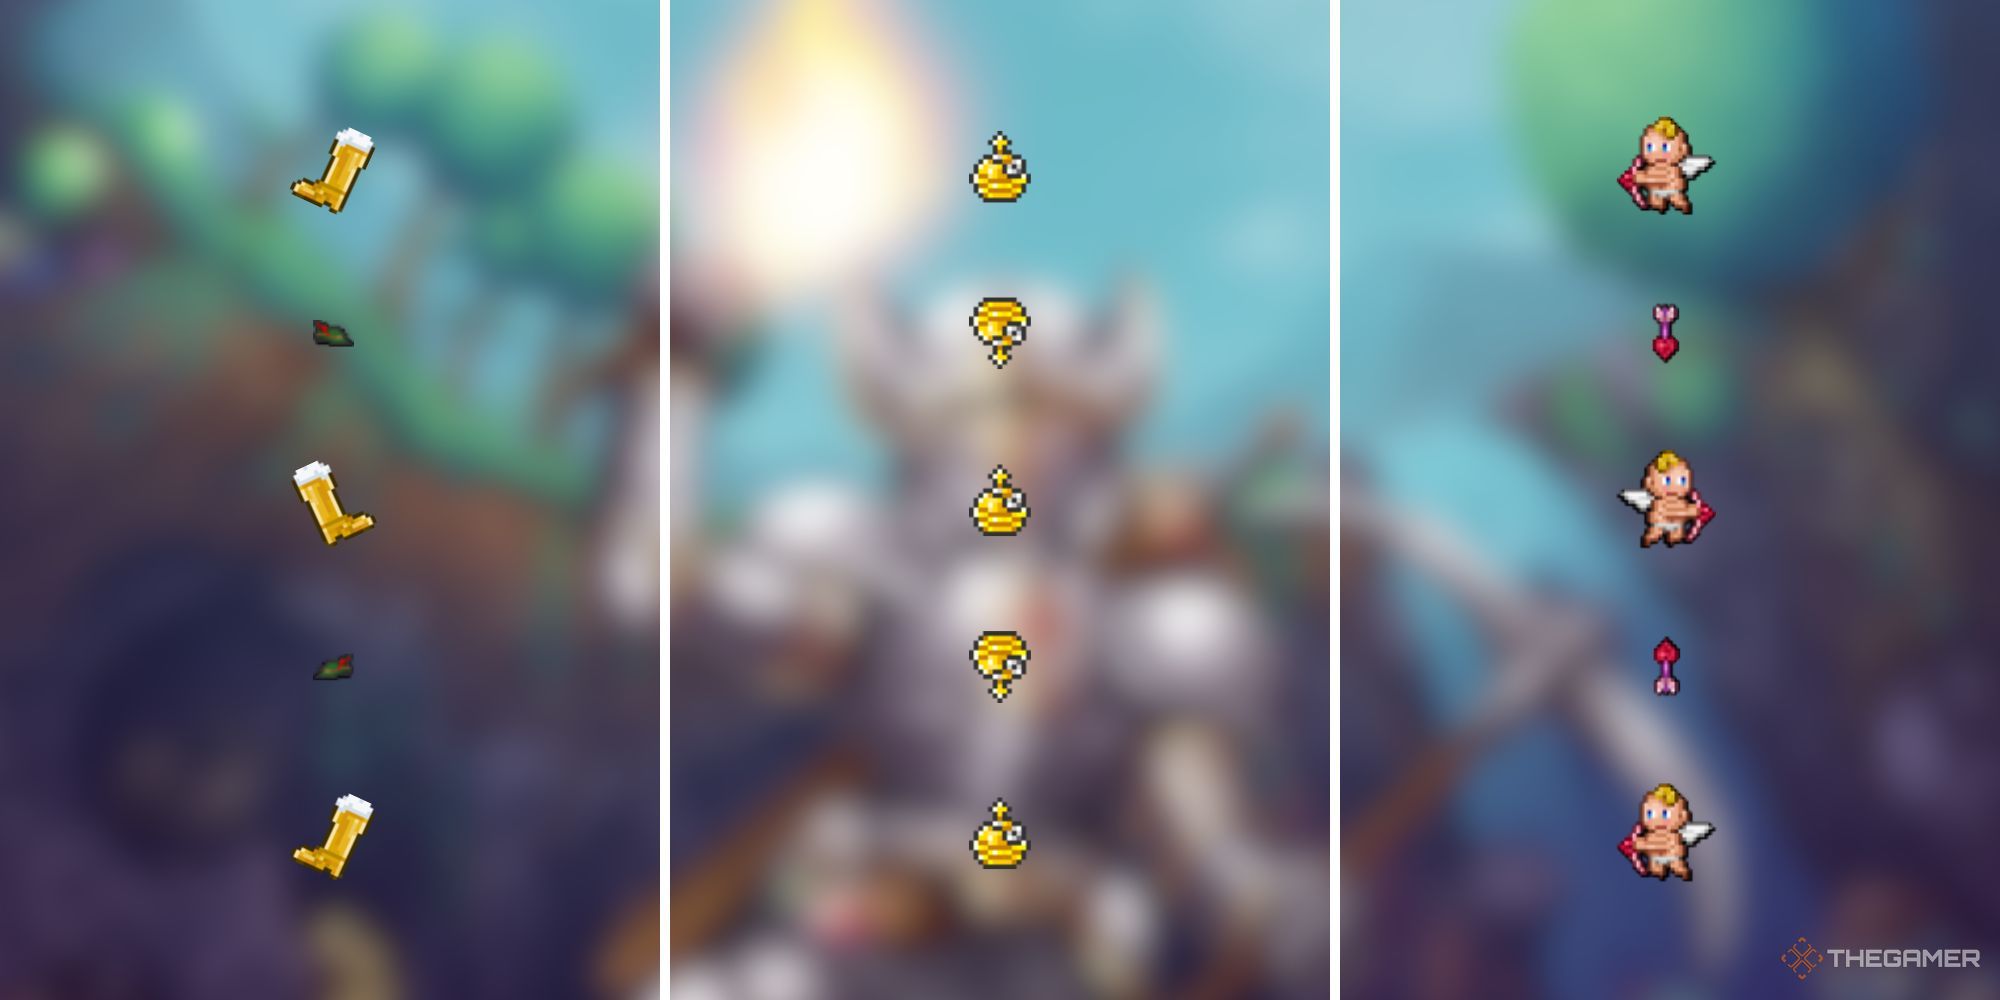 A split image of rows of Oktoberfest accessories, golden holy hand grenades, and Valentine's Day heart arrows and flying pets.